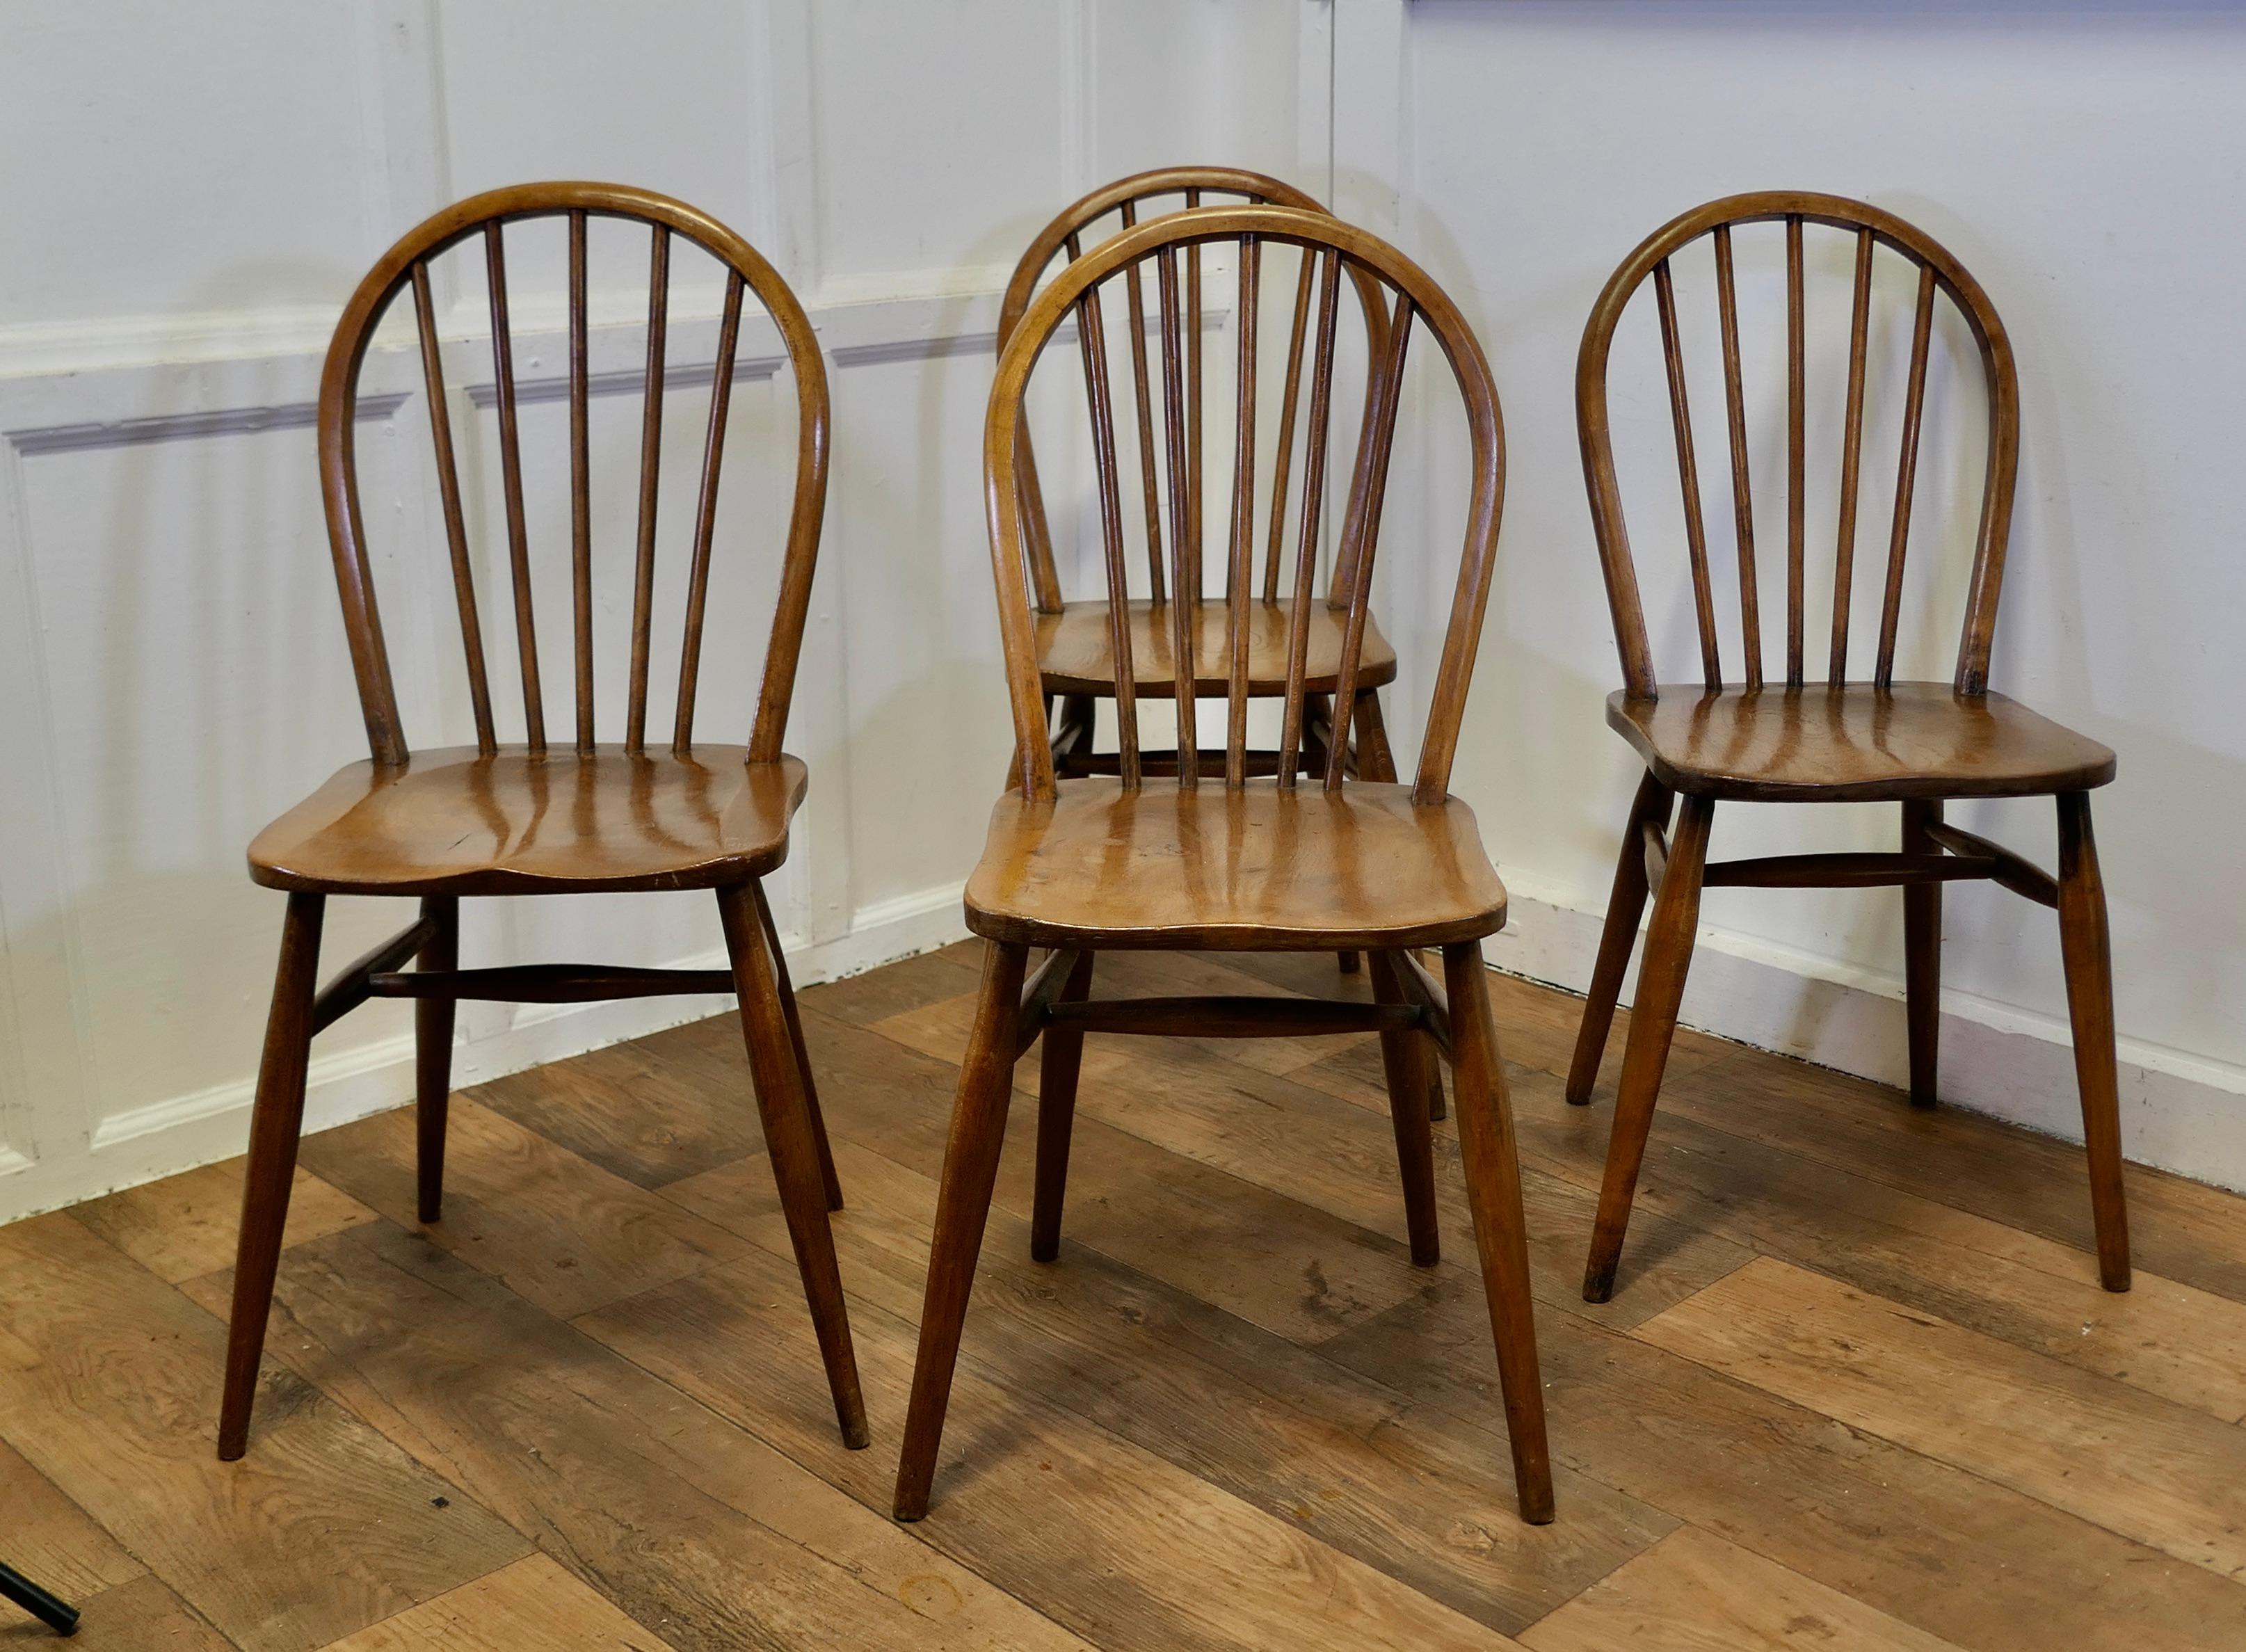 A Set of 4 Golden Beech and Elm Windsor Country Dining Chairs 

The chairs are of superb quality, they are craftsman made and are very roomy and comfortable The chairs are in solid elm with a hooped back and turned spindles
The chairs are very